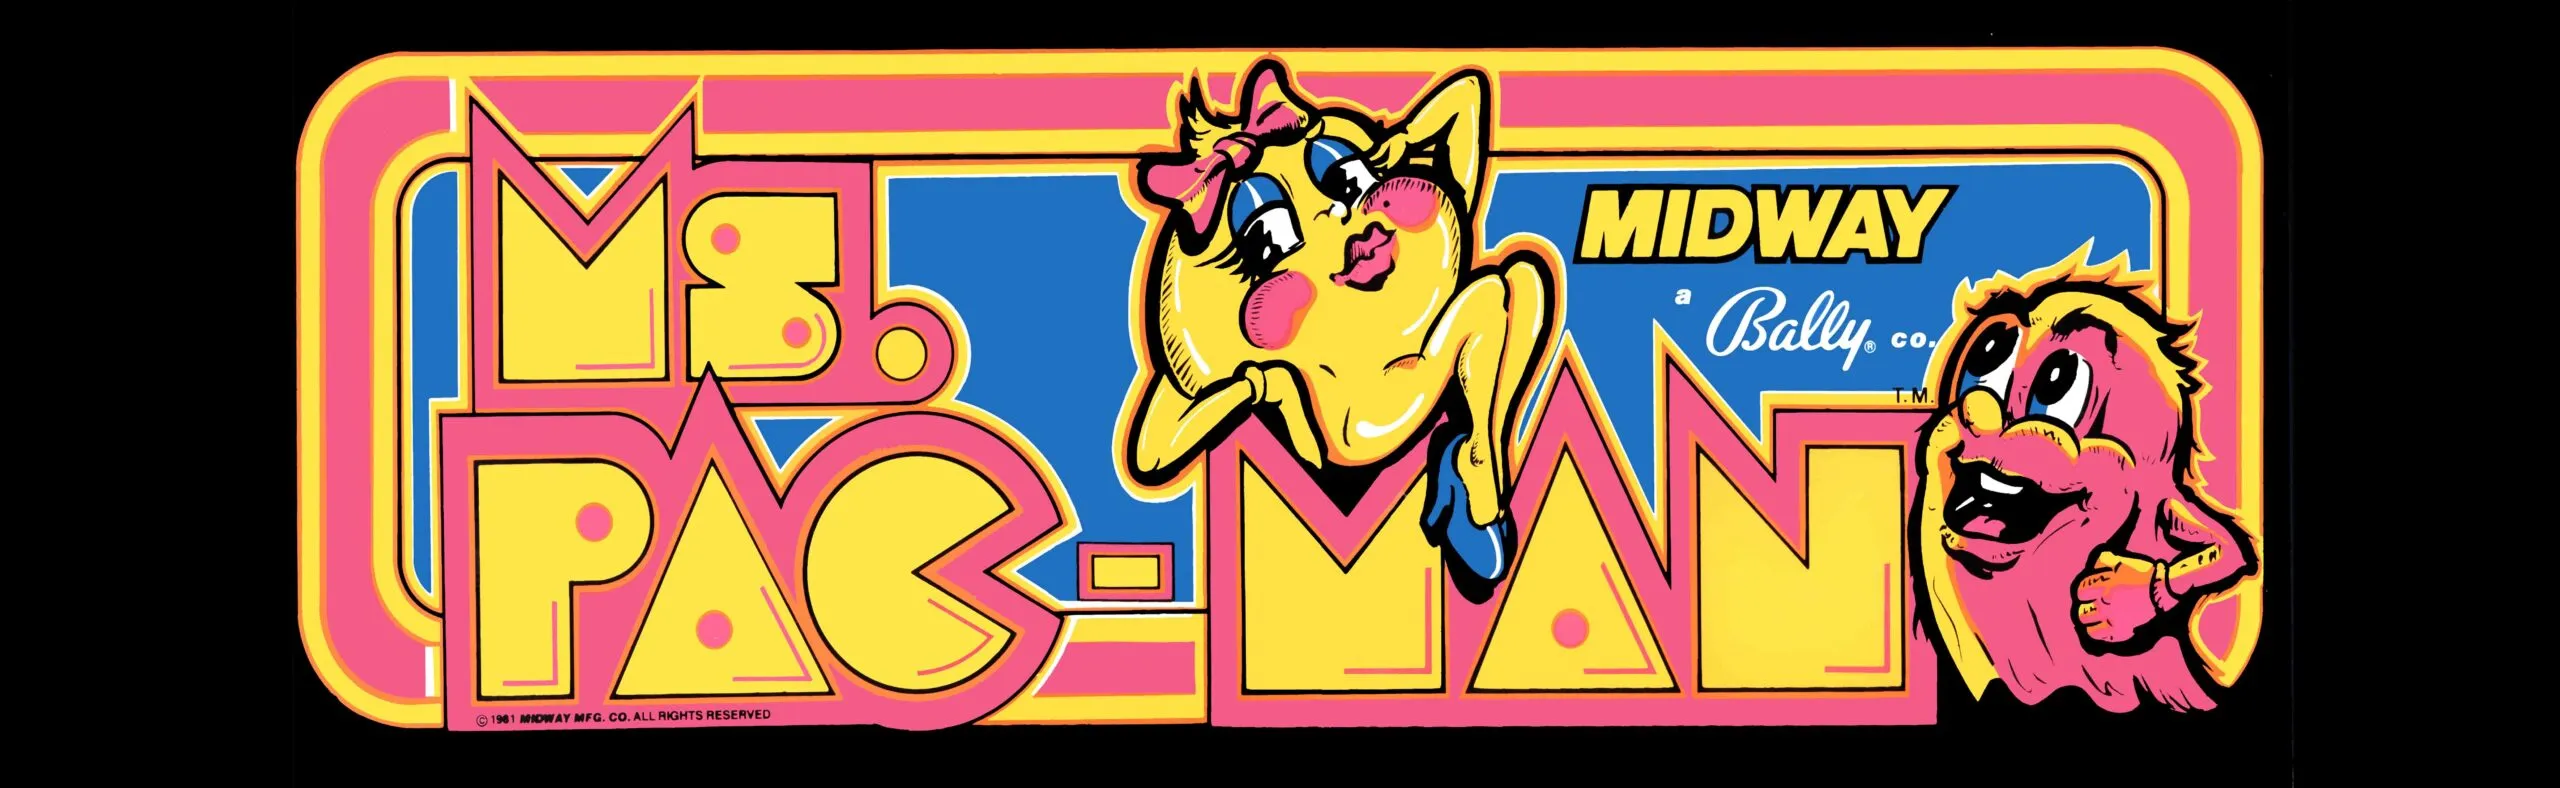 Ms. Pac-Man logo from the 1980s. Features a drawing of a heavily feminized Pac-Man with a bow on her head, blue eyeshadow, long eyelashes, red cheeks, red lipstick, high-heal shoes, and doing a sexy pose. There is a red ghost oggling her.